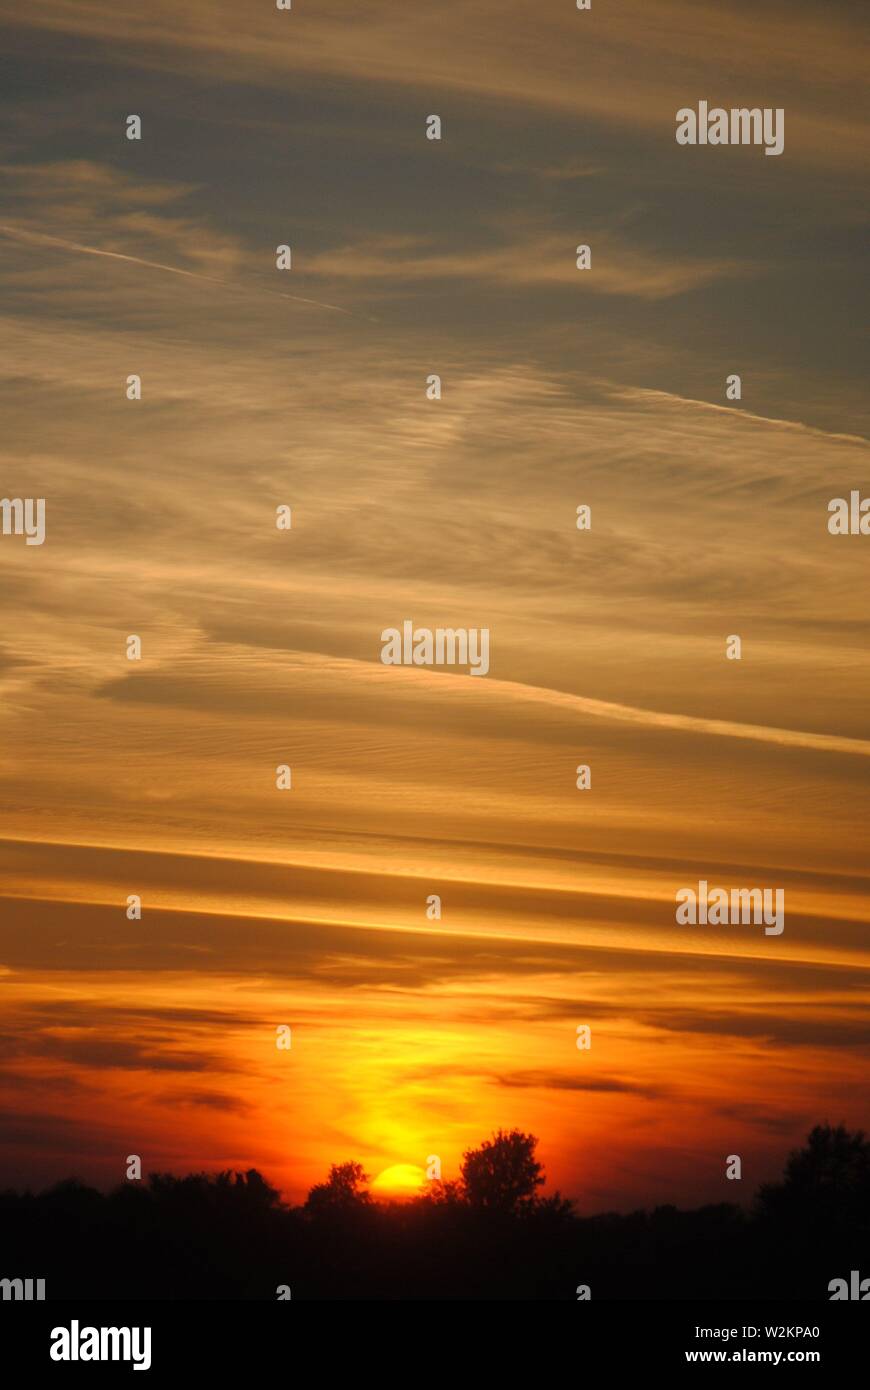 strong orange and yellow natural sunset with silhouette foreground and patterned clouds. Stock Photo